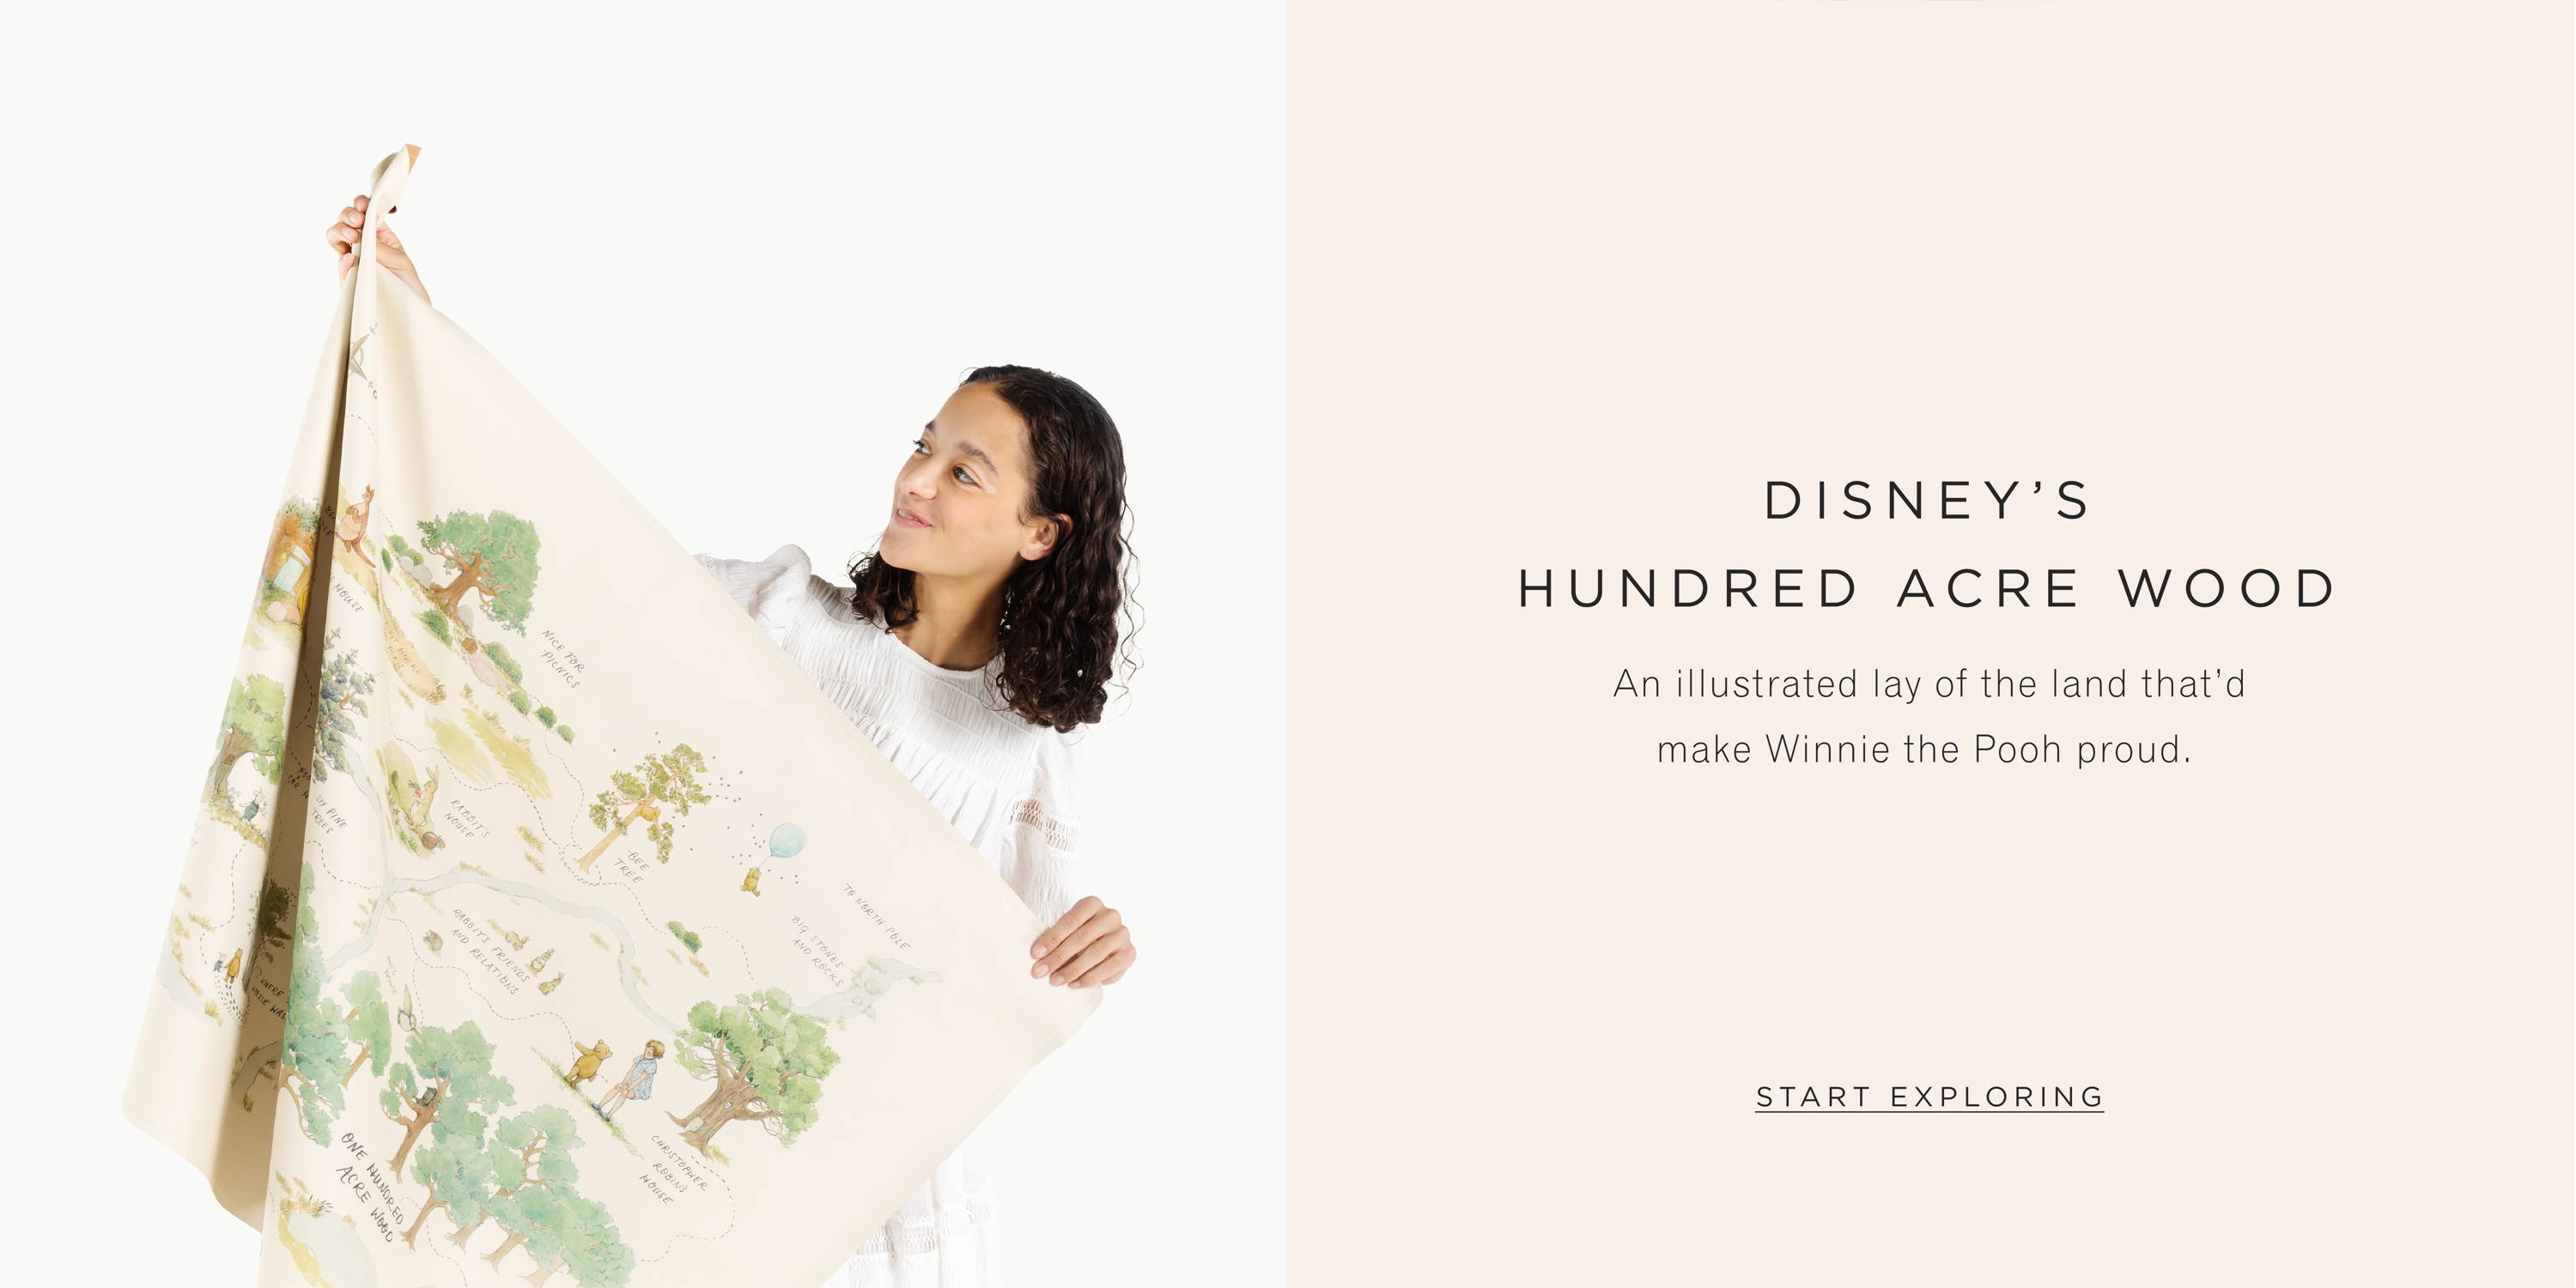 Disney's Hundred Acre wood. An illustrated lay of the land that'd make Winnie the Pooh proud. START EXPLORING.